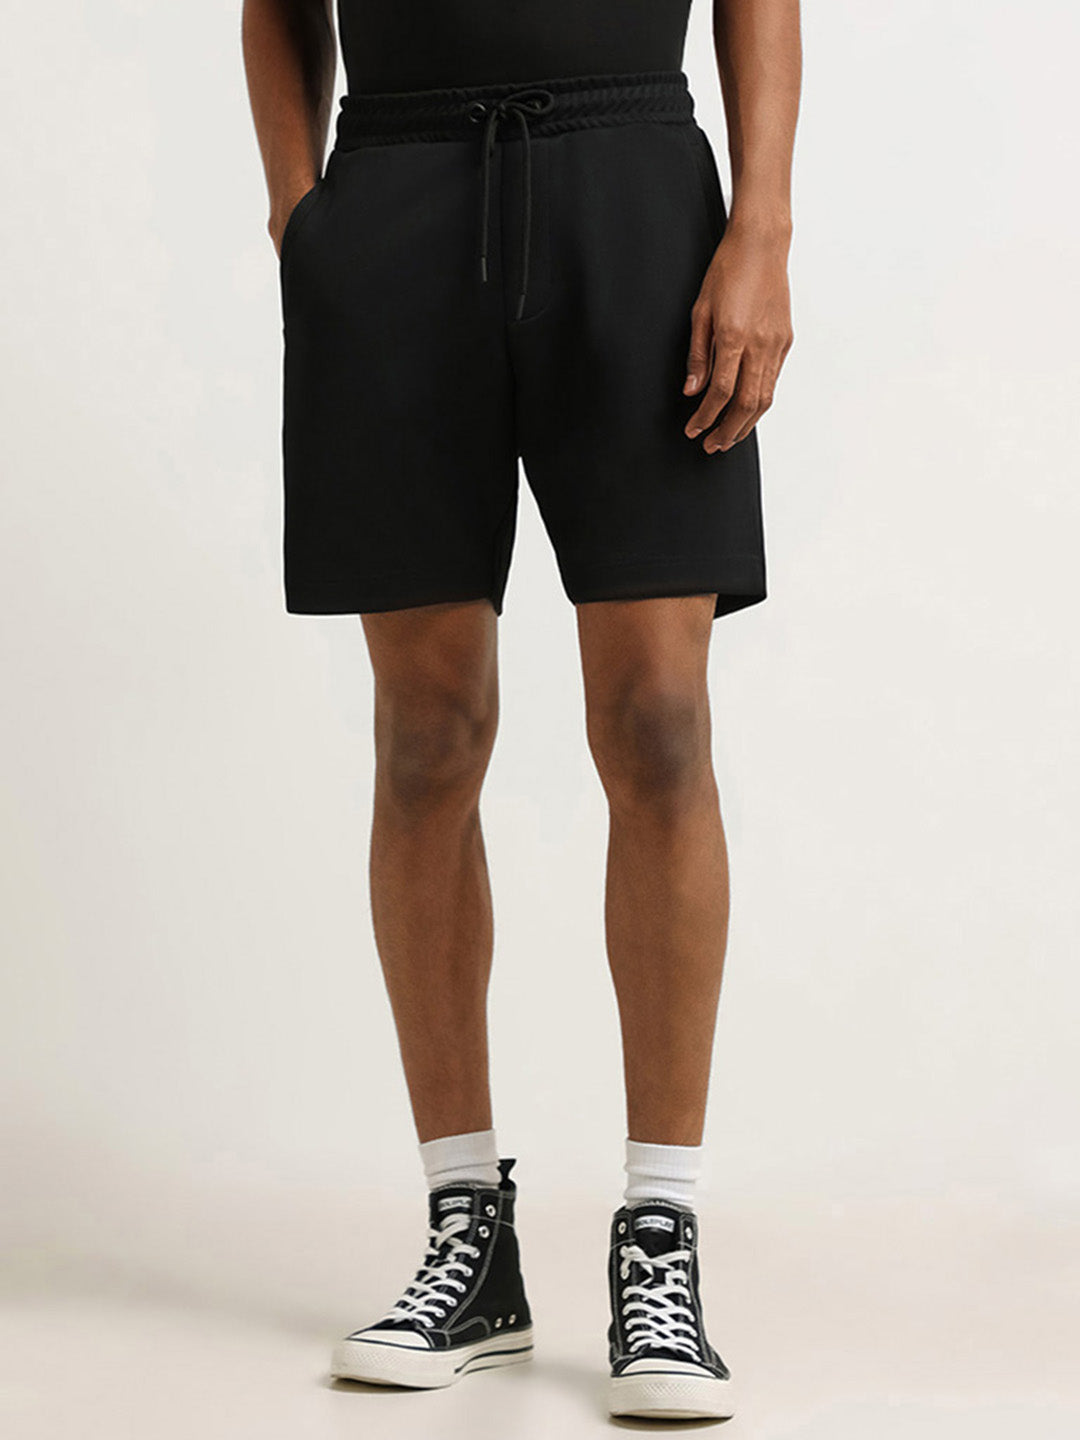 Studiofit Black Self Patterned Relaxed Fit Shorts